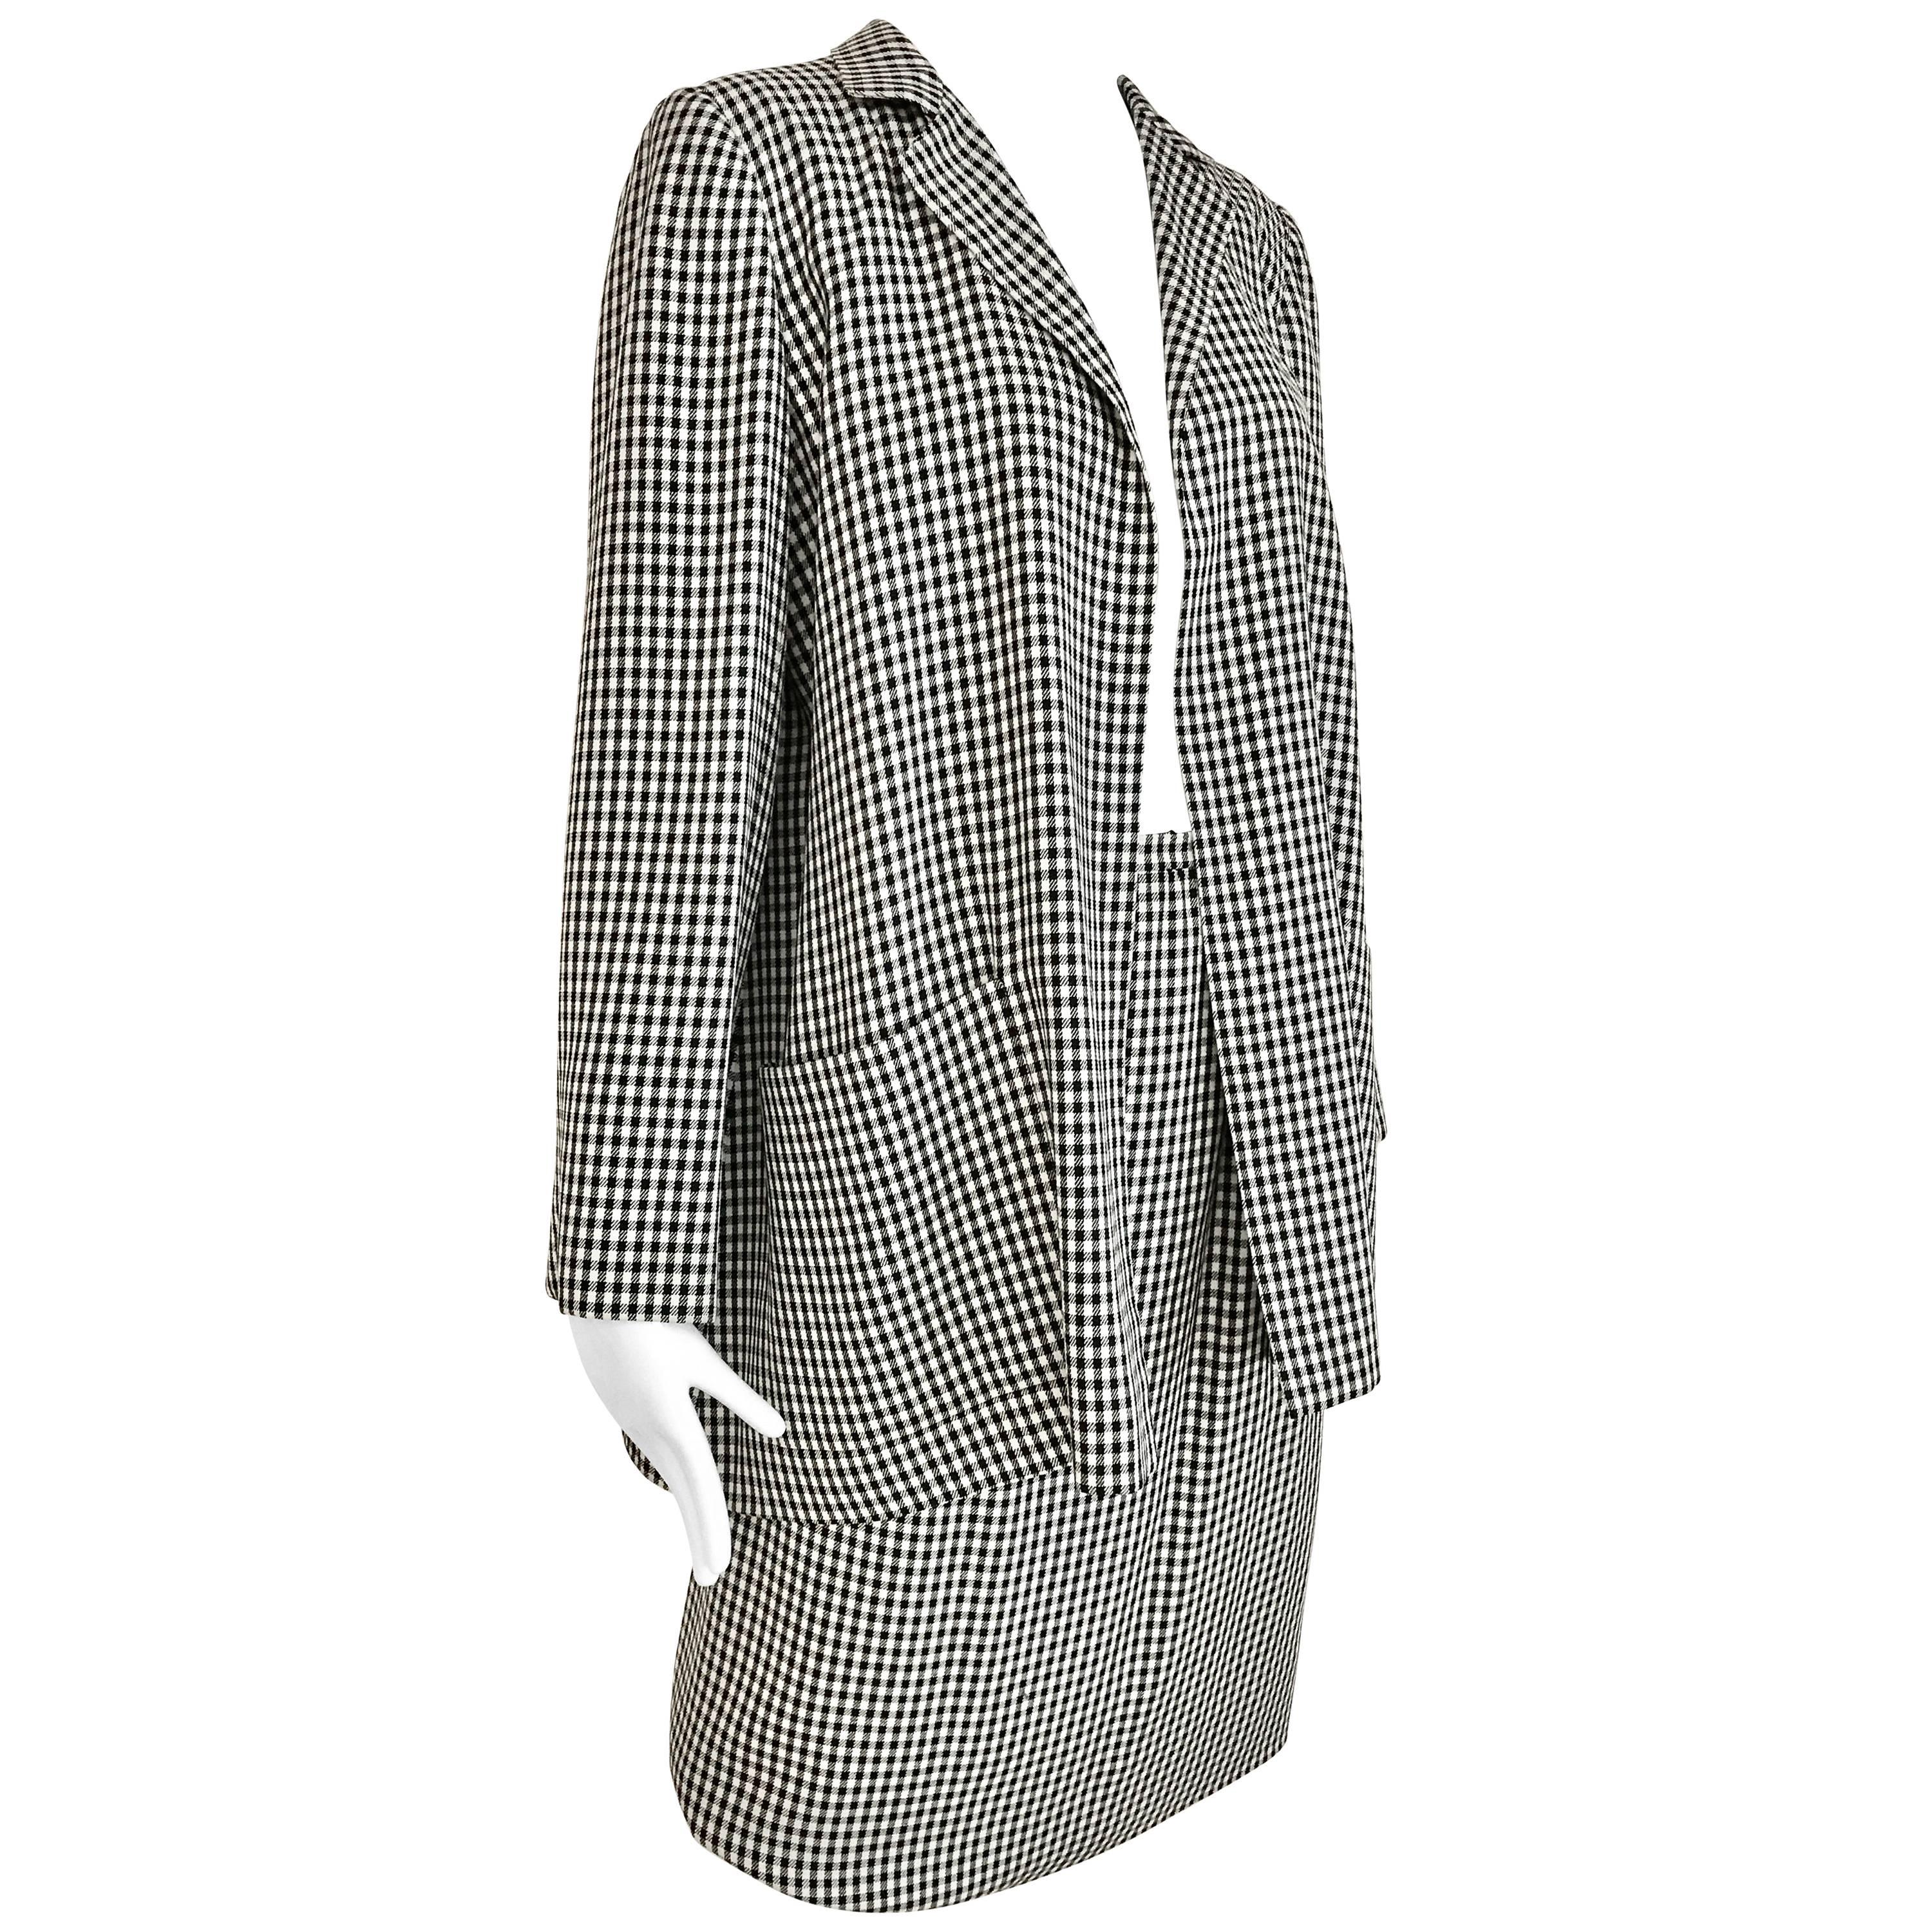 1970s Christian Dior Couture Black and White Checkered Jacket and skirt set